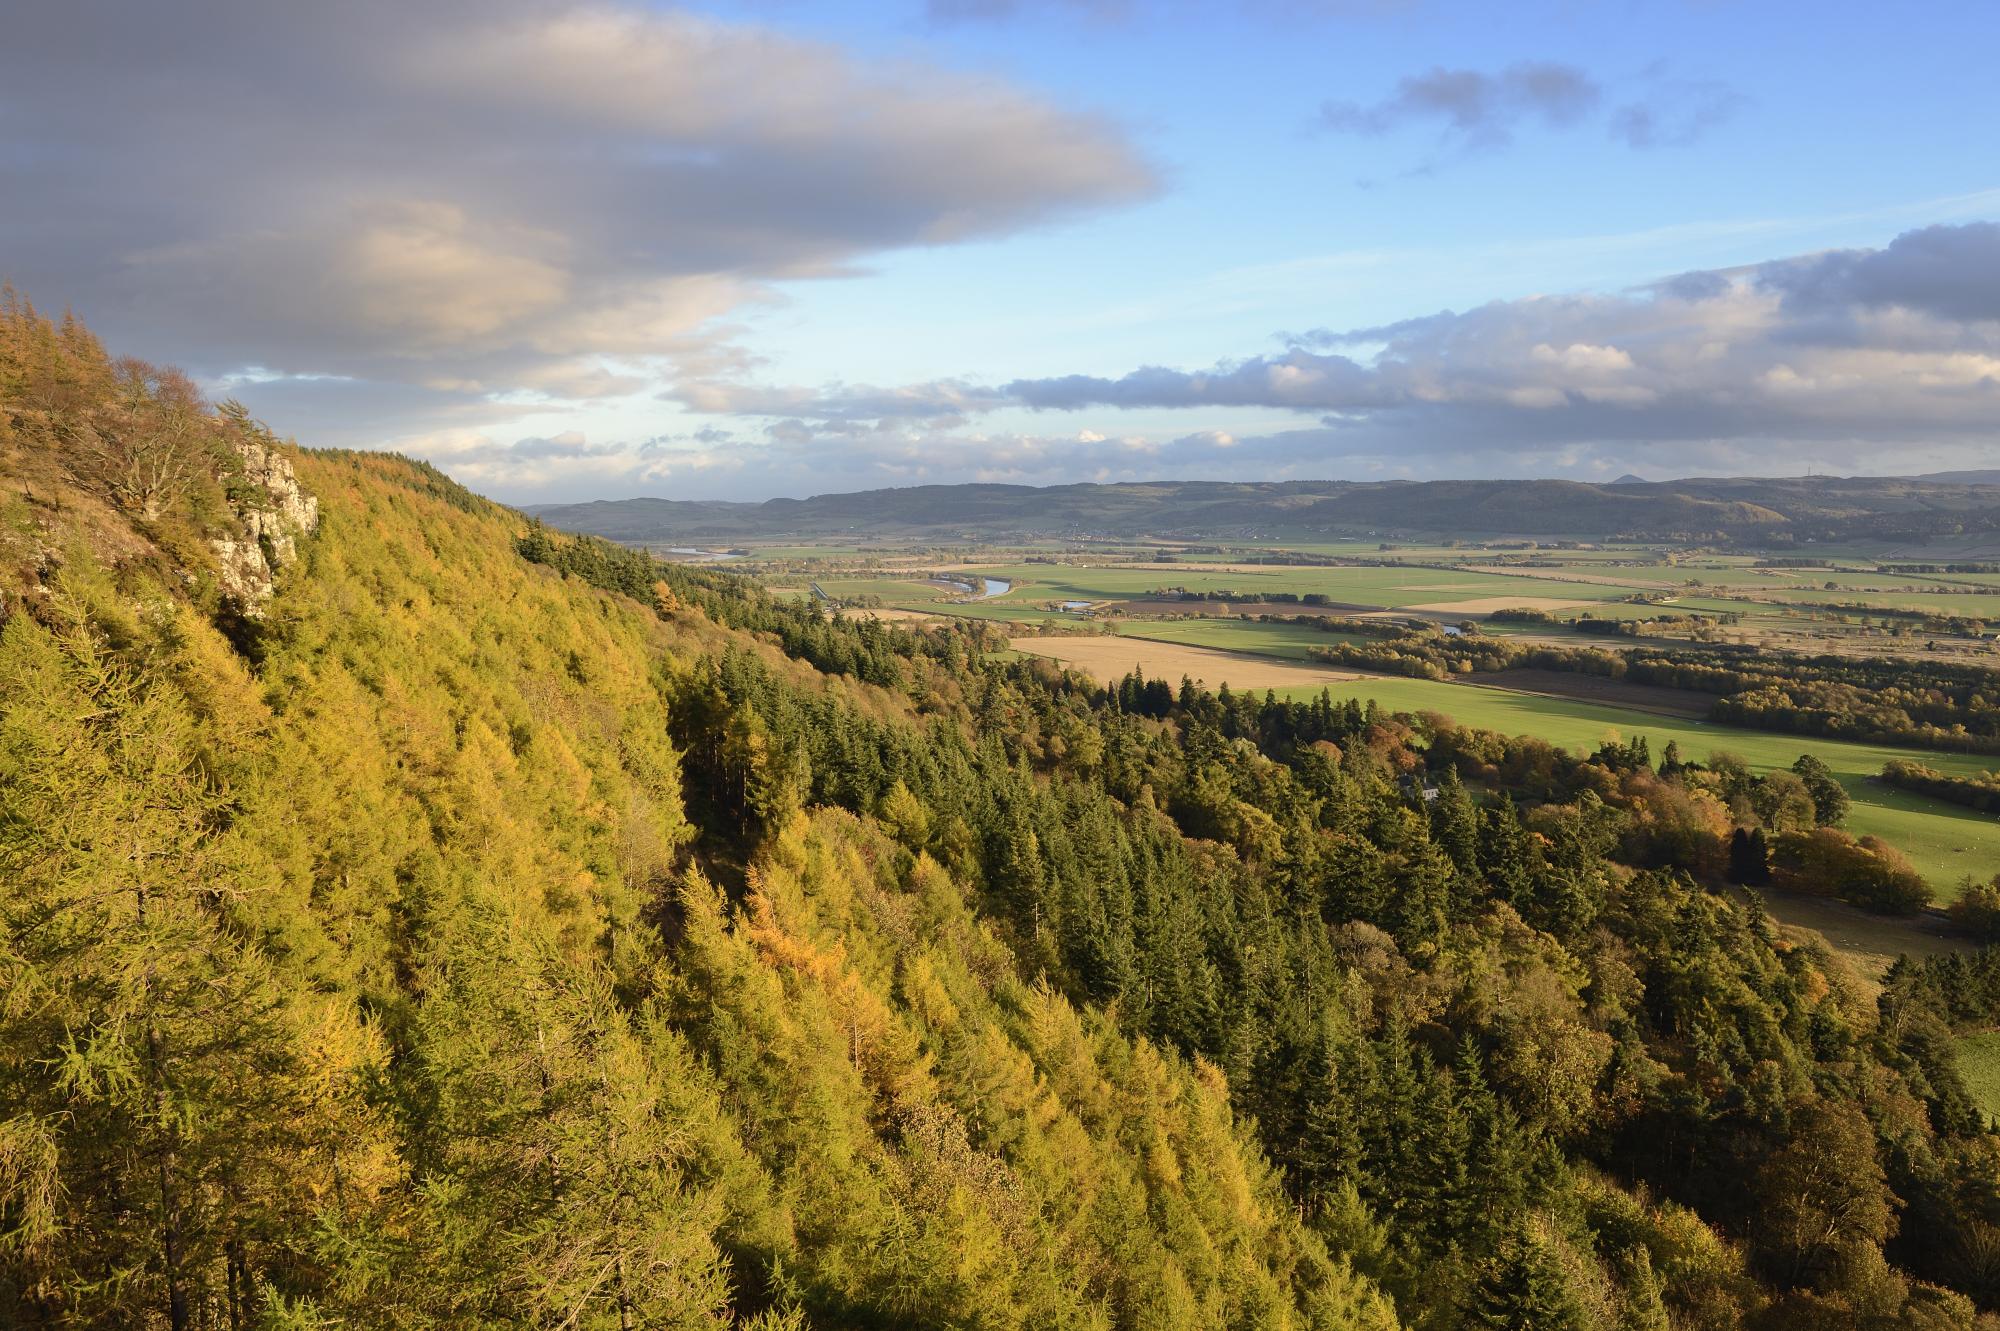 View over Moncrieff Woodland Park and Bridge of Earn from Moncrieff Hill showing trees and fields